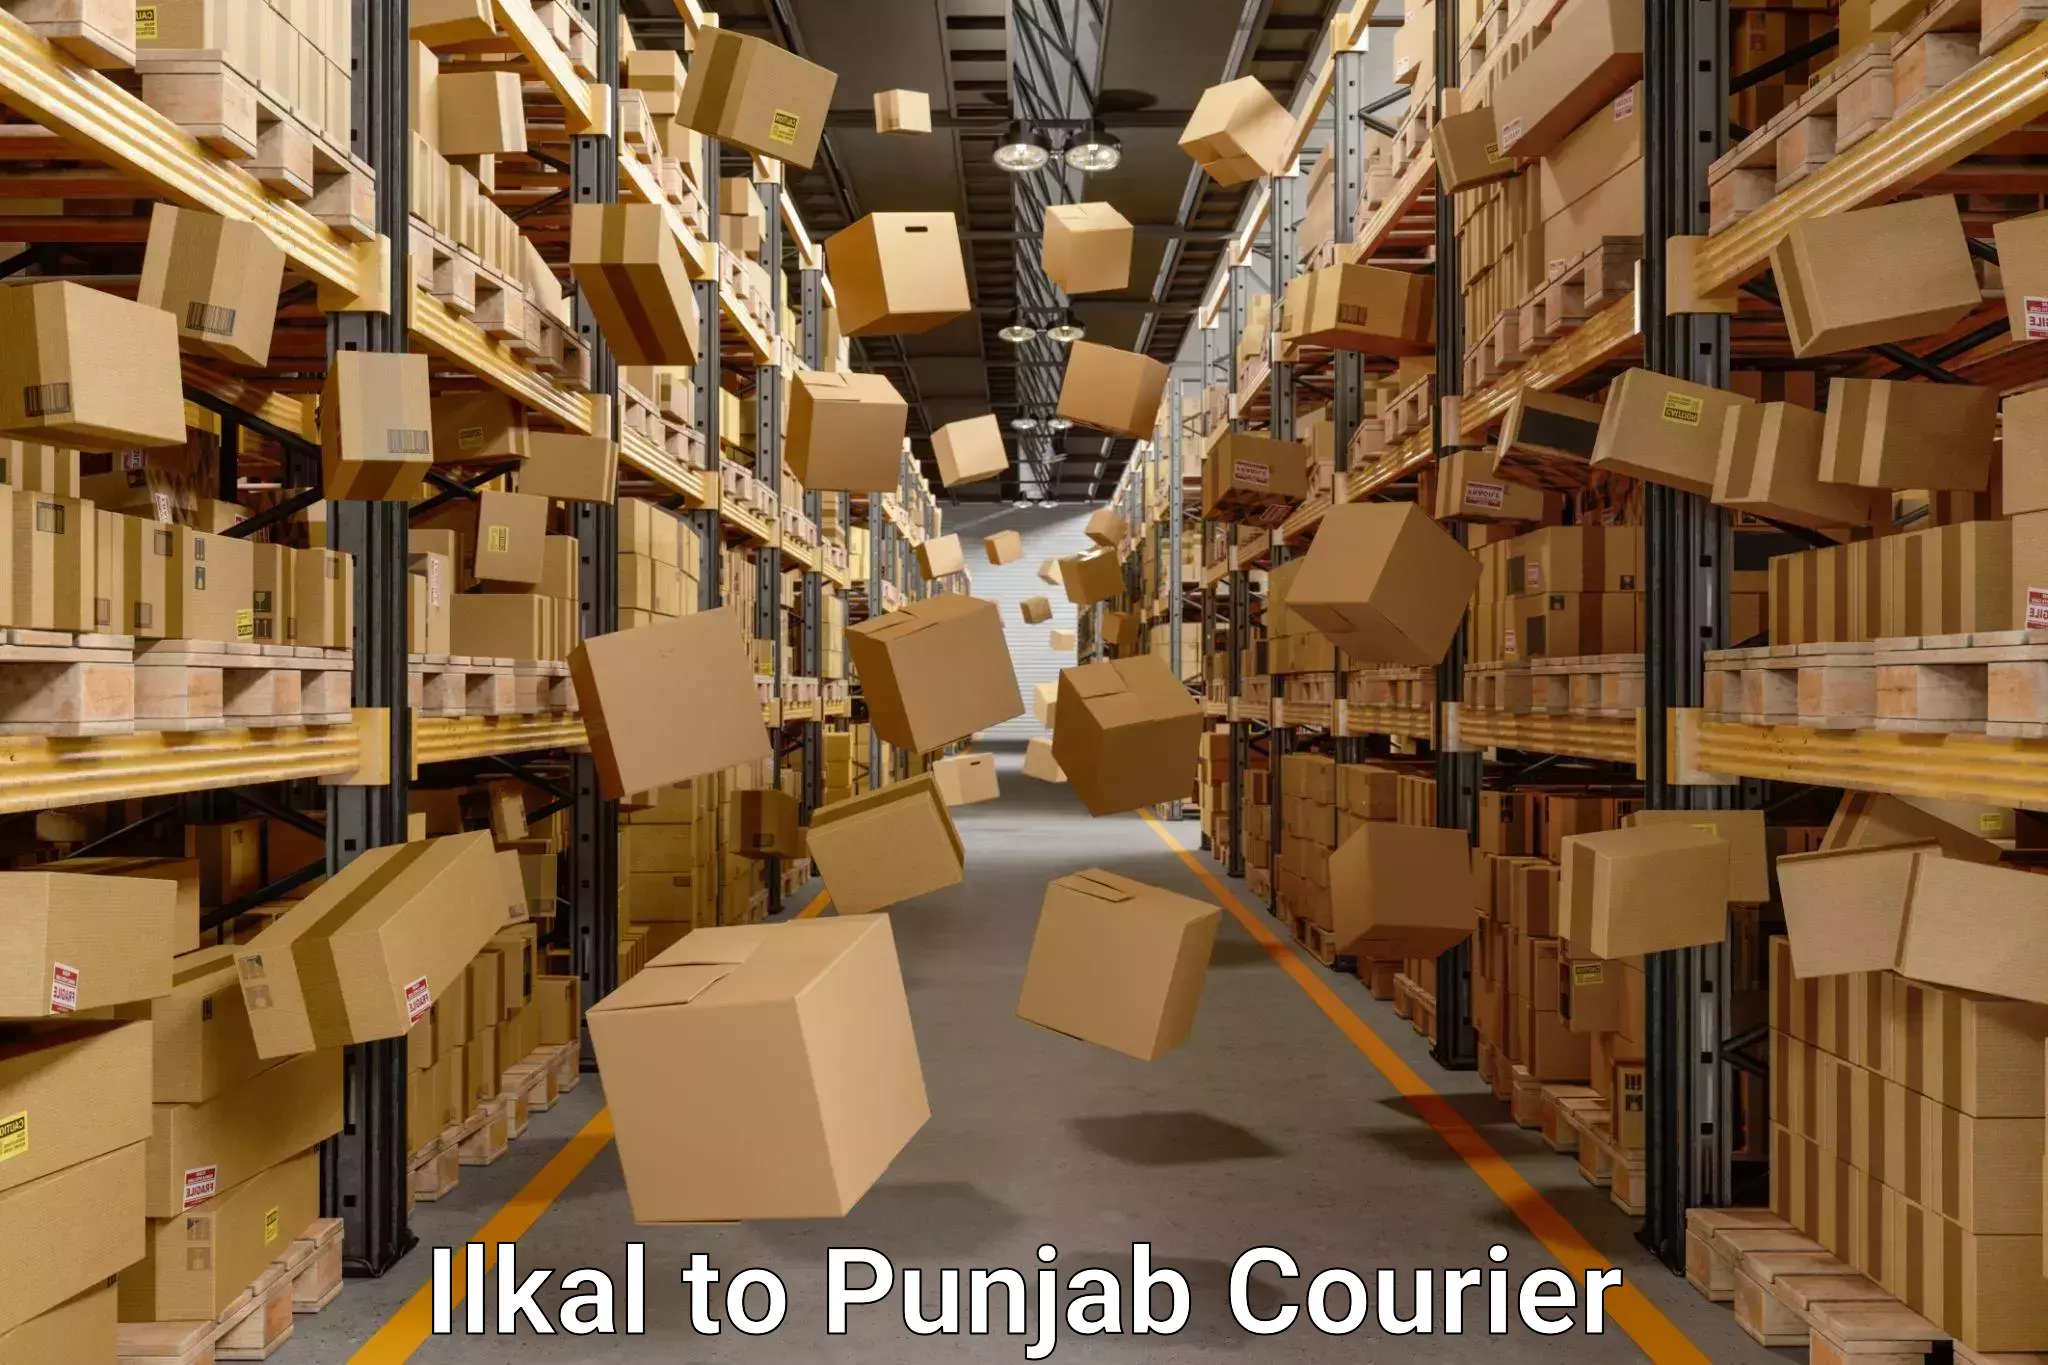 Home relocation services Ilkal to Punjab